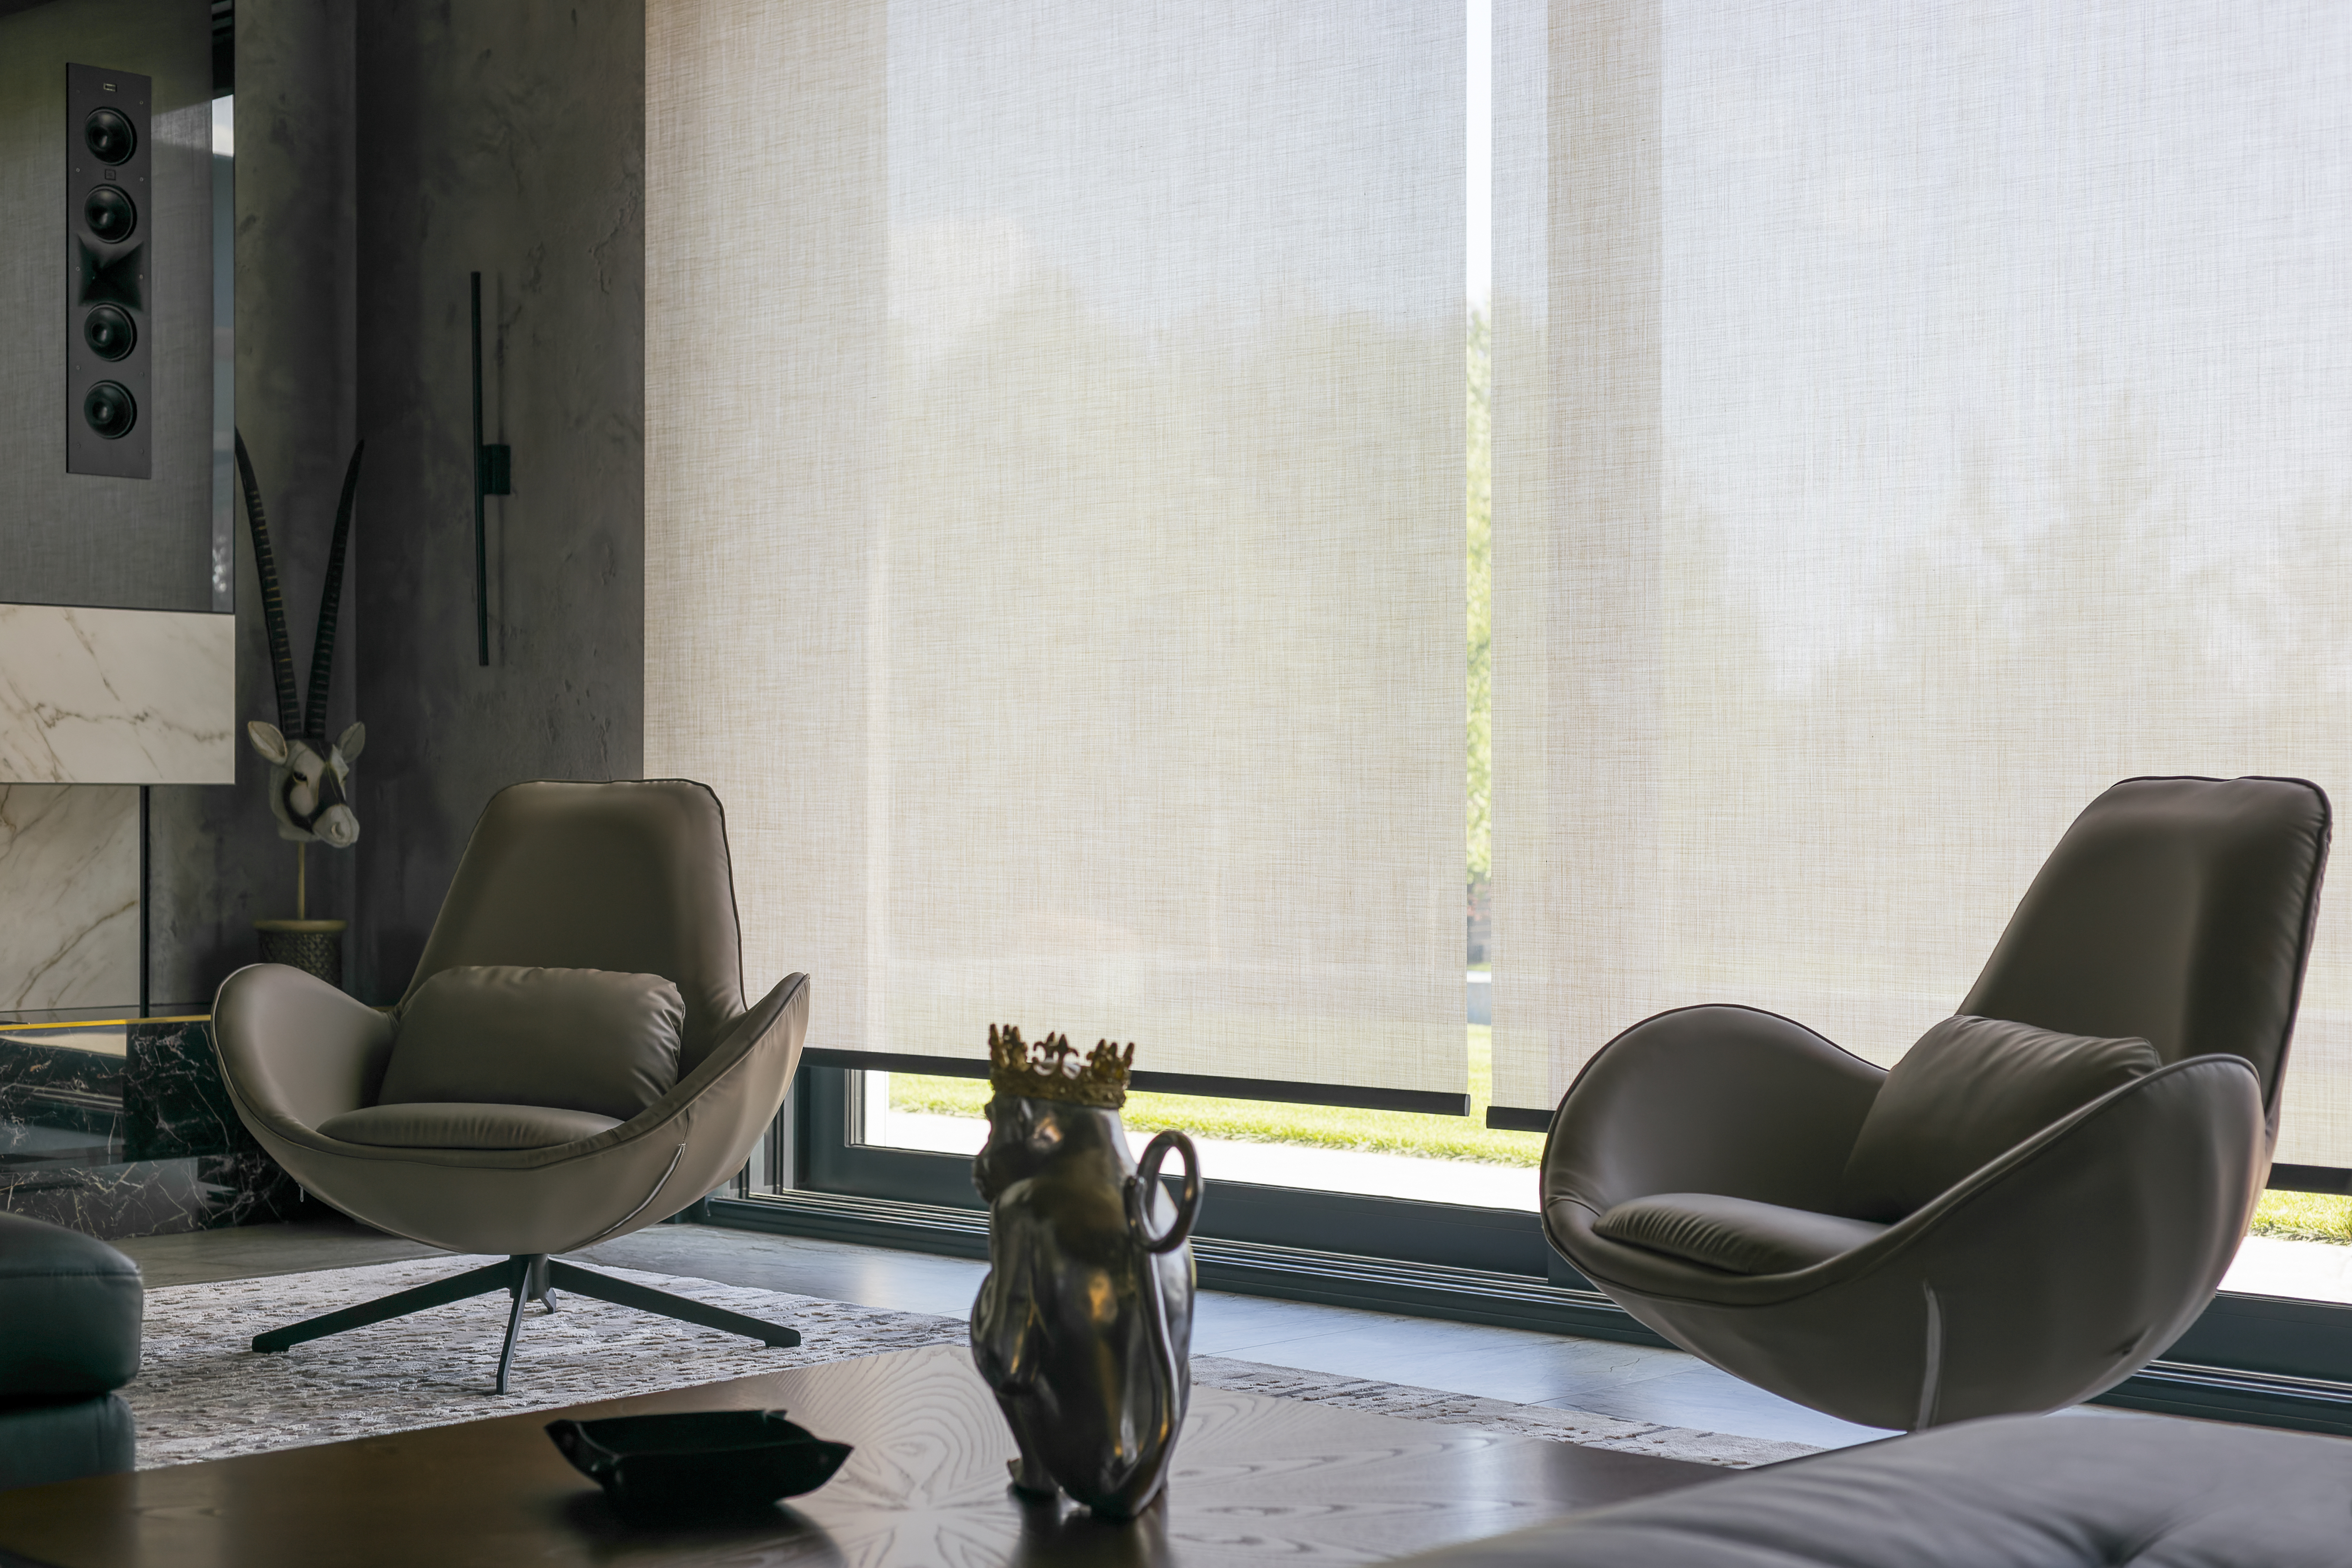 4 Things You Didn’t Know About the Magic of Motorized Shades